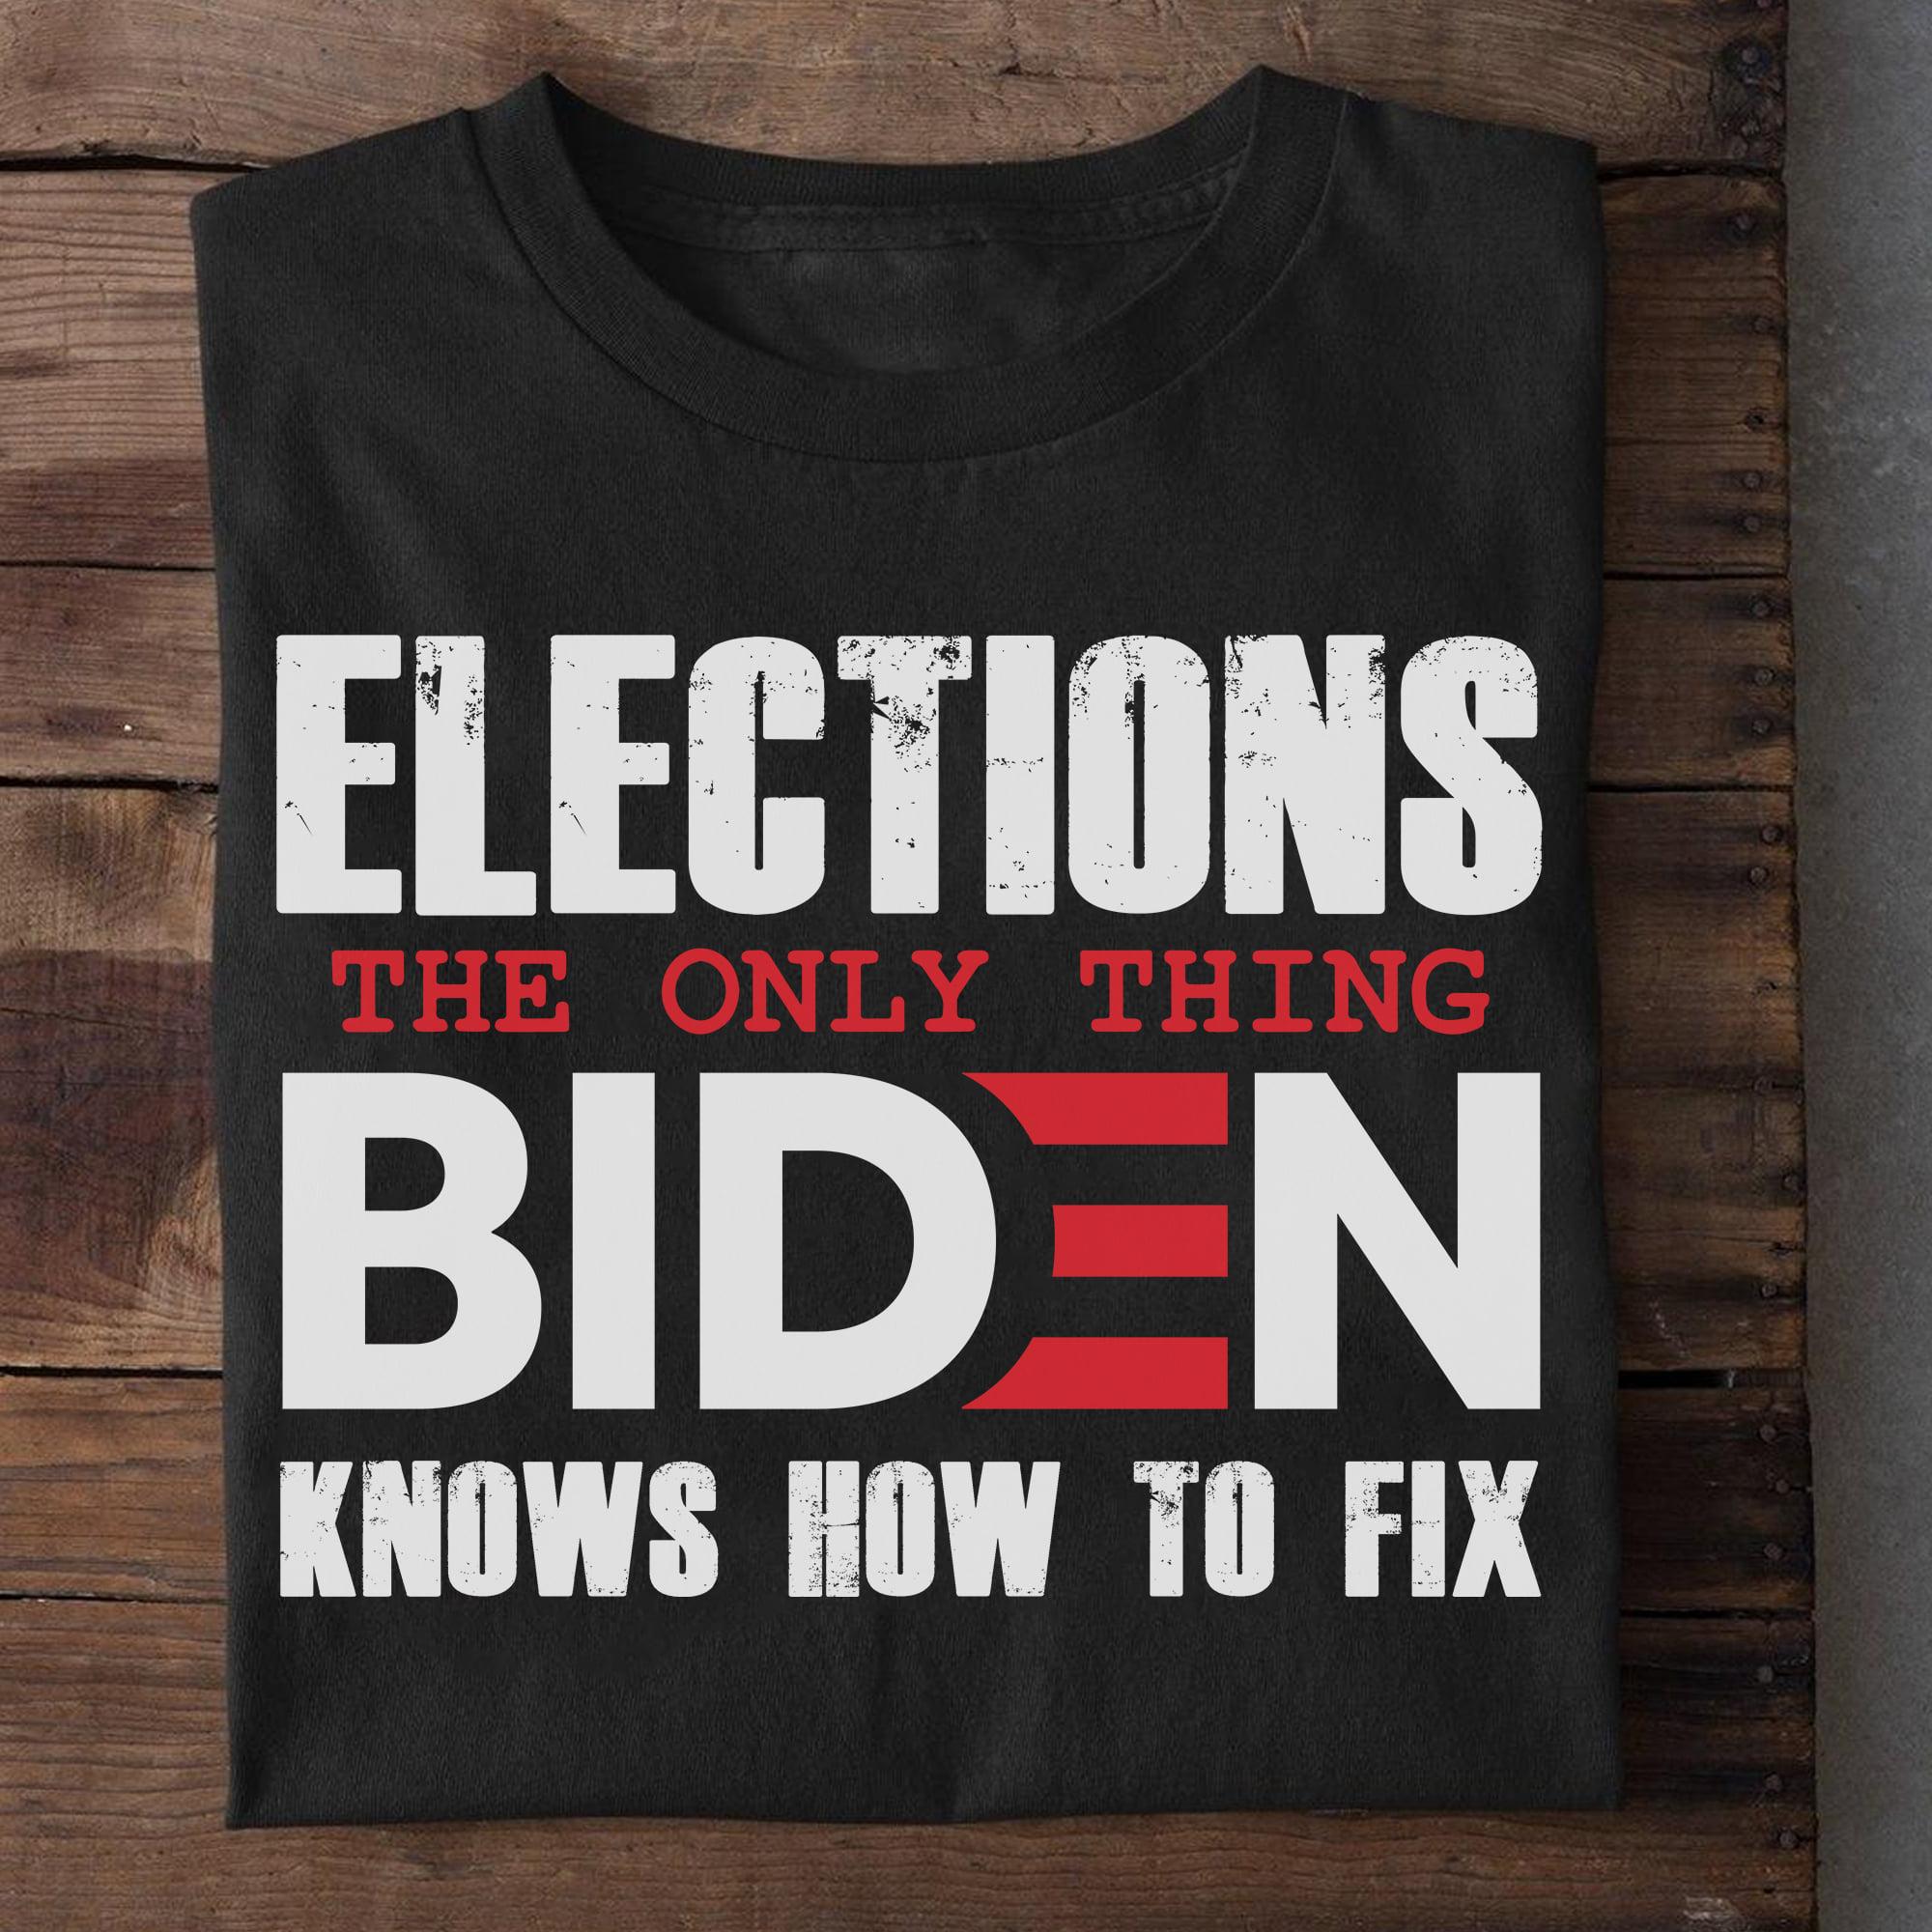 Elections the only thing biden knows how to fix Shirt, Hoodie ...